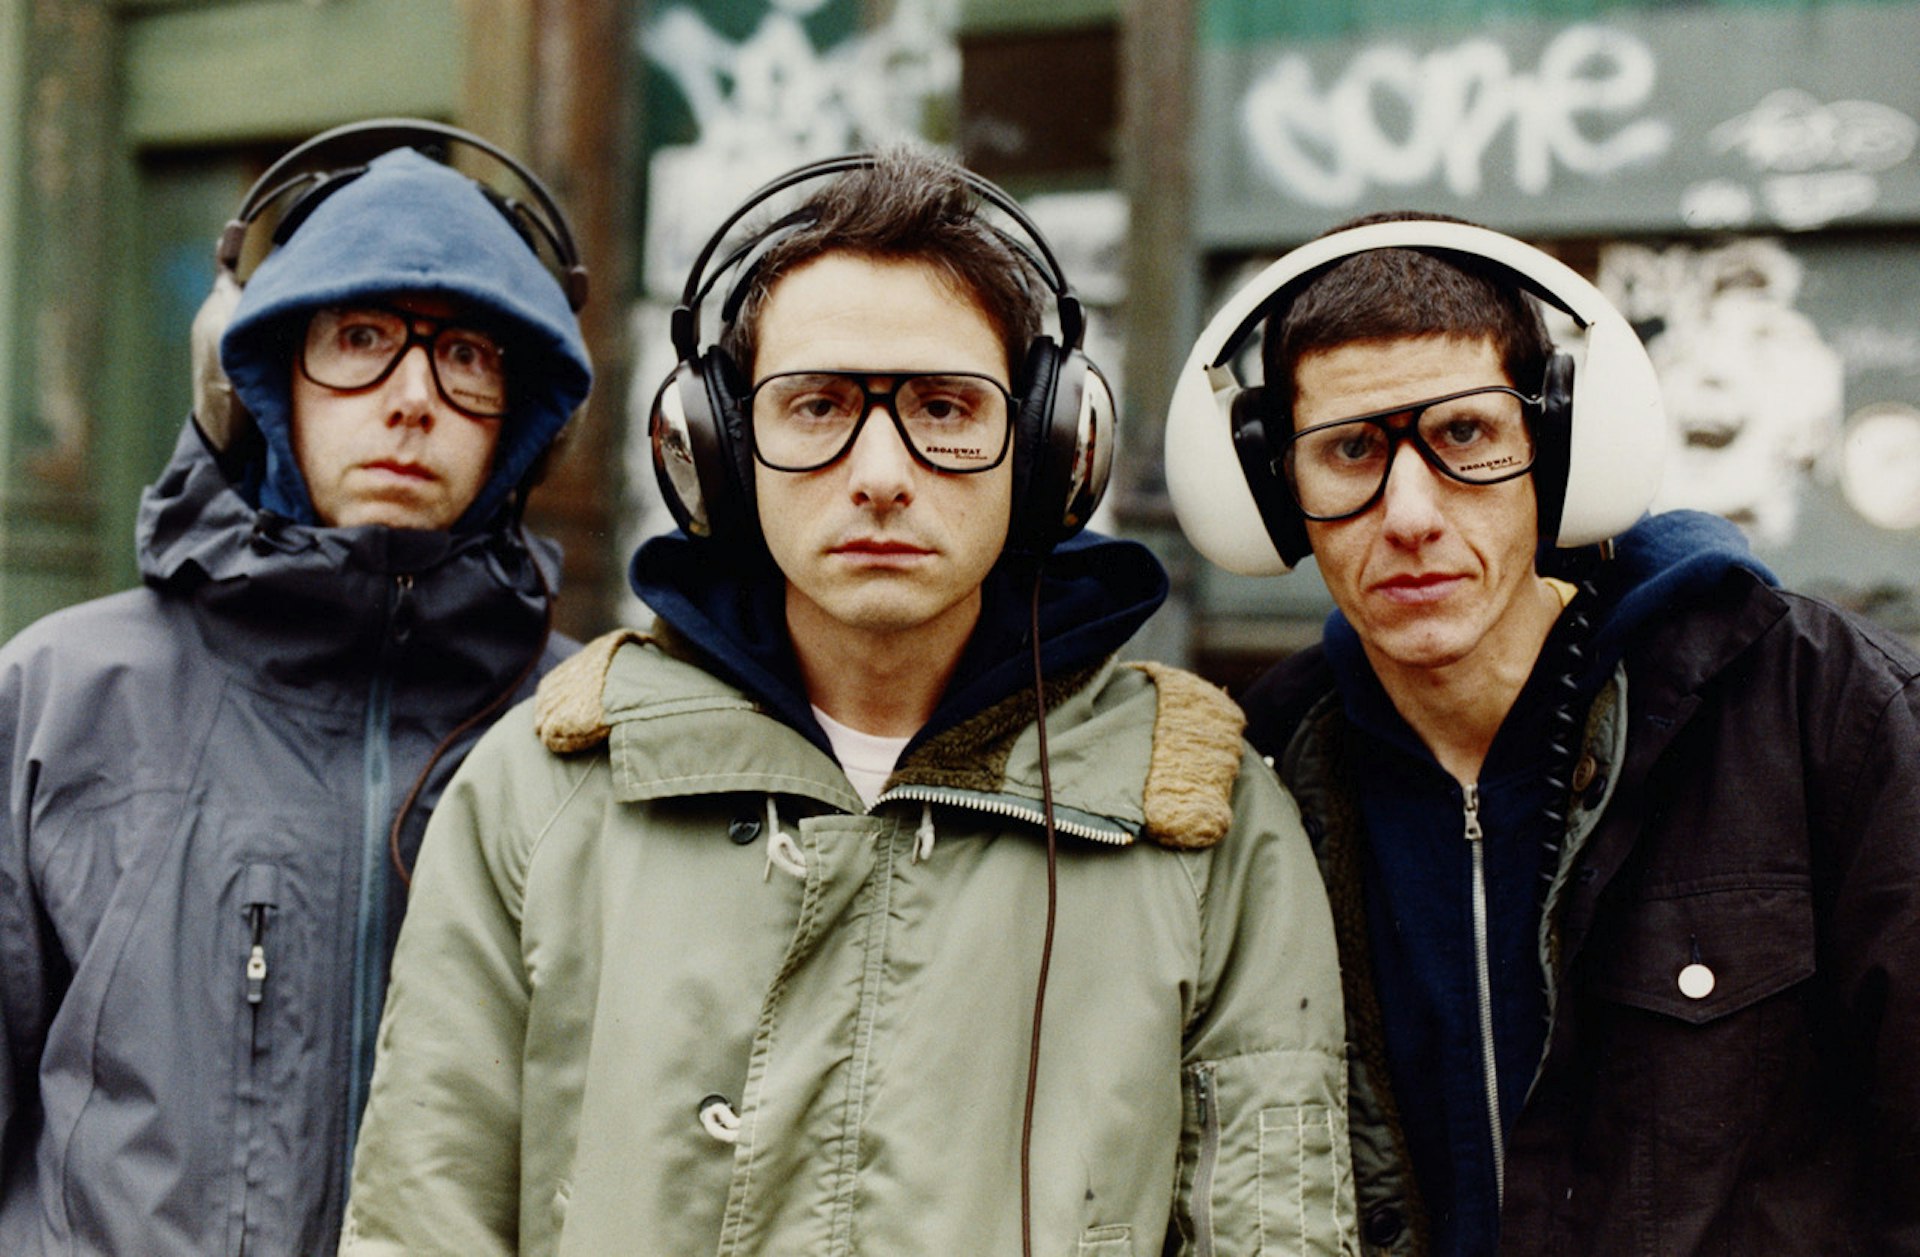 The Mix-Up: A lost interview with the Beastie Boys